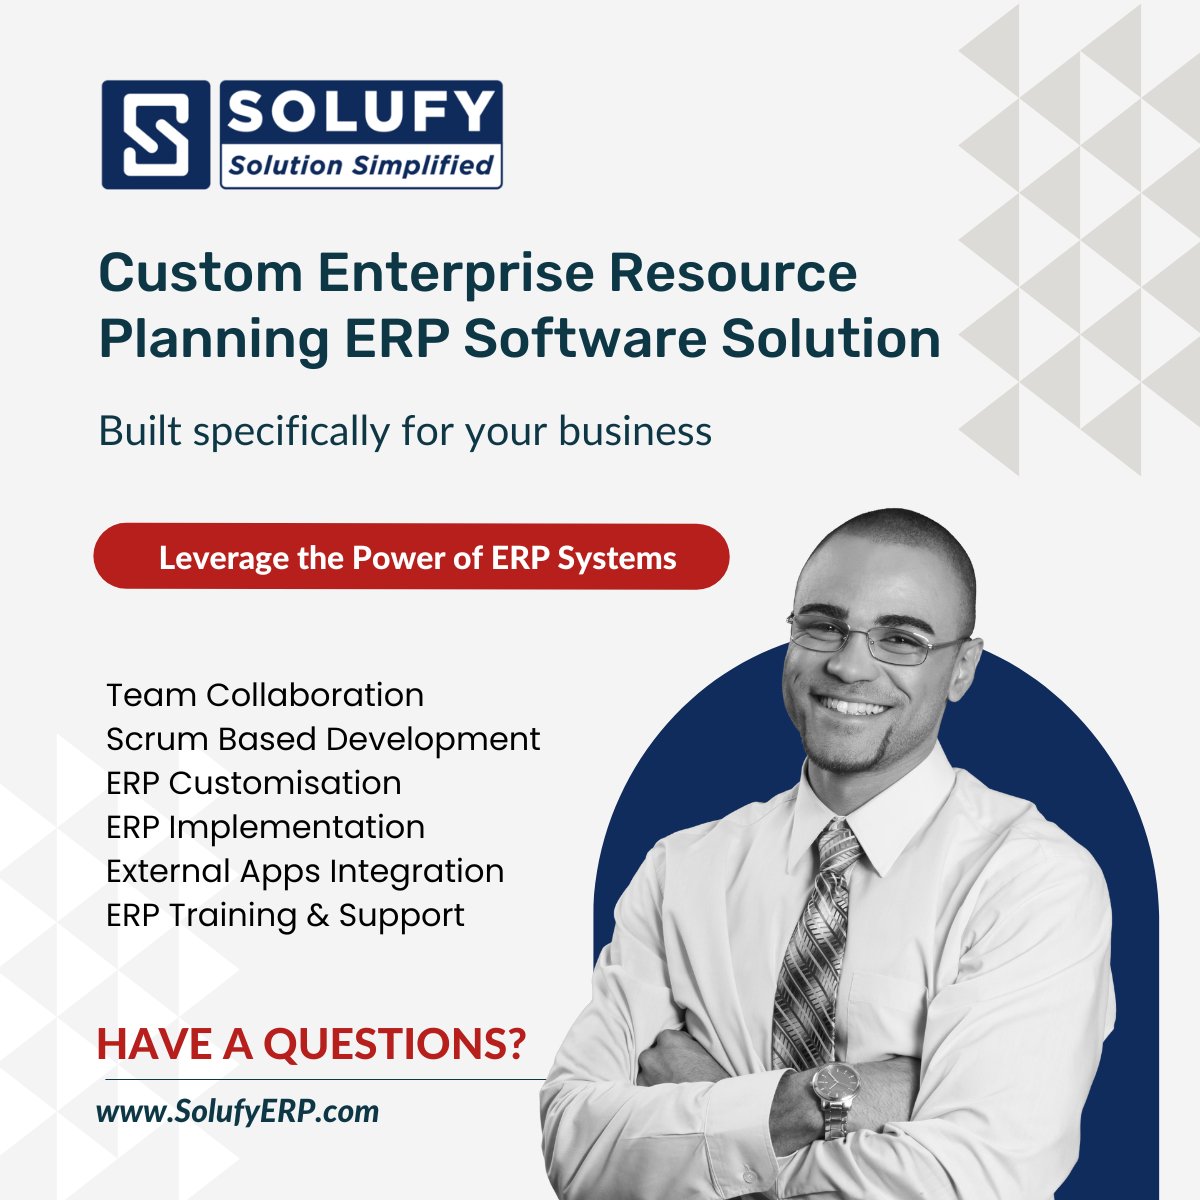 ⚡️ Custom Enterprise resource planning #ERPServices and Solutions built specifically for your business

👉 Connect with #ERPExperts

📱 +919033472982
✉️contact@solufy.in

#Solufy #ERP #erpdevelopment #erpImplementation #erpConsulting #erpCustomization #erpTraining #erpsupport